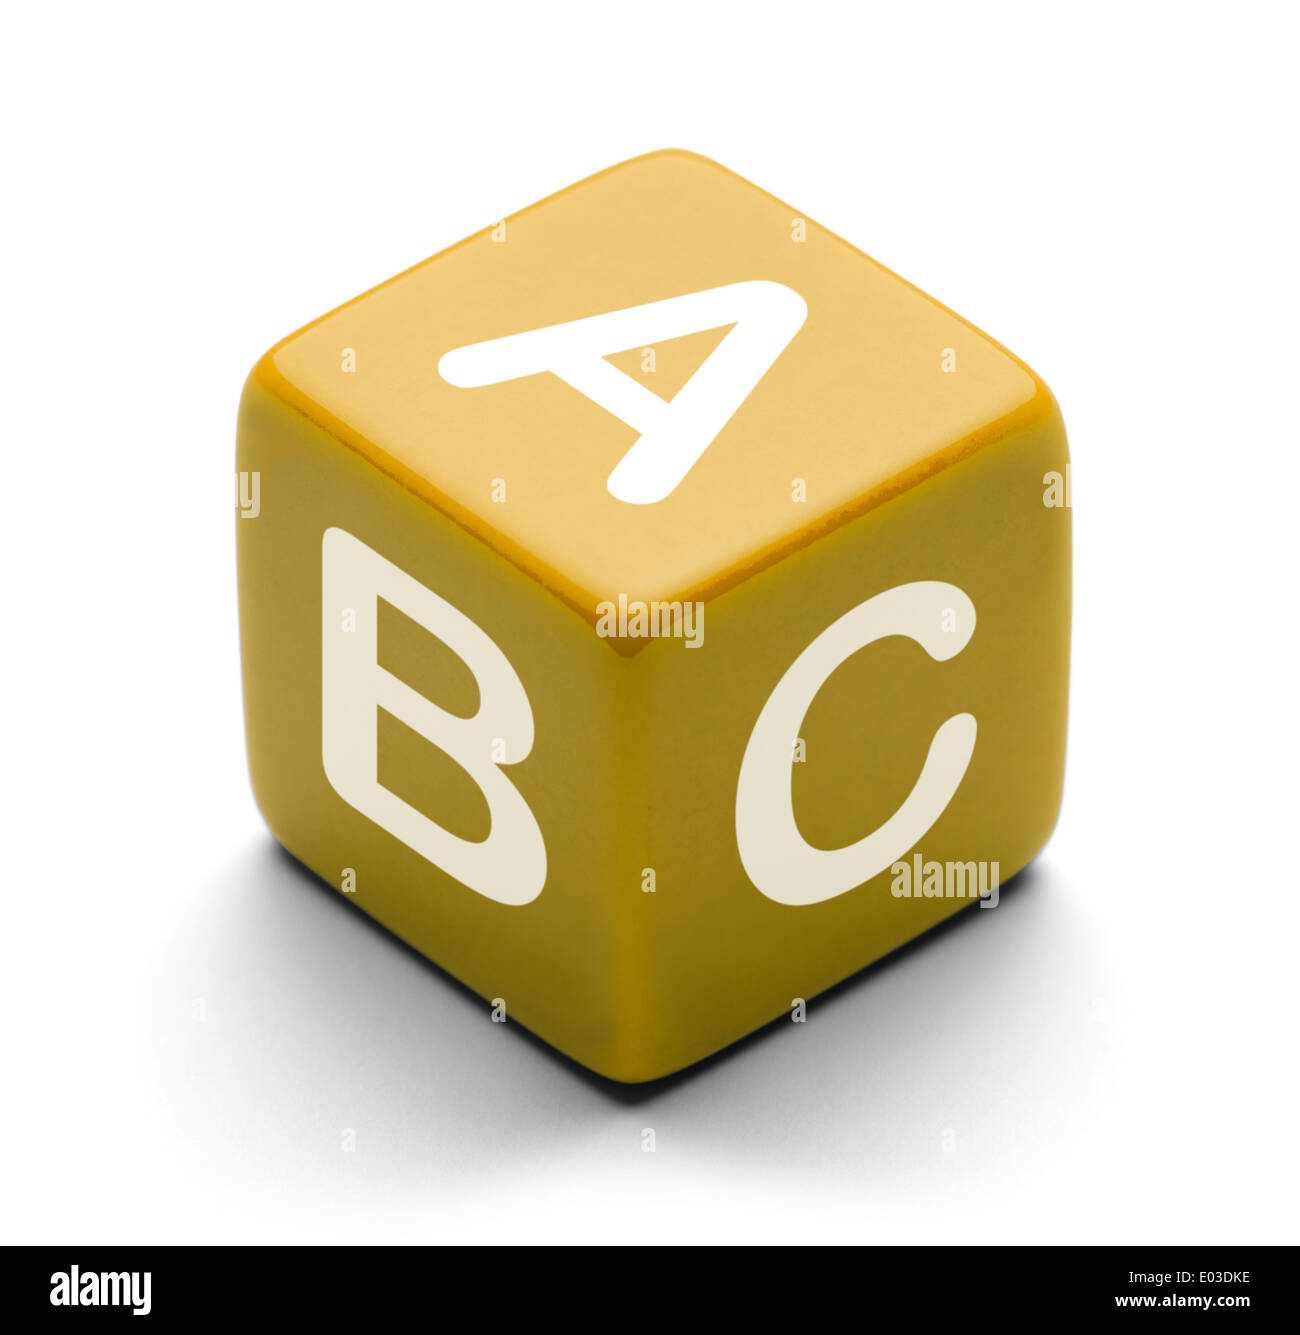 Yellow Dice With letters A B and C on it Isolated on White Background. Stock Photo